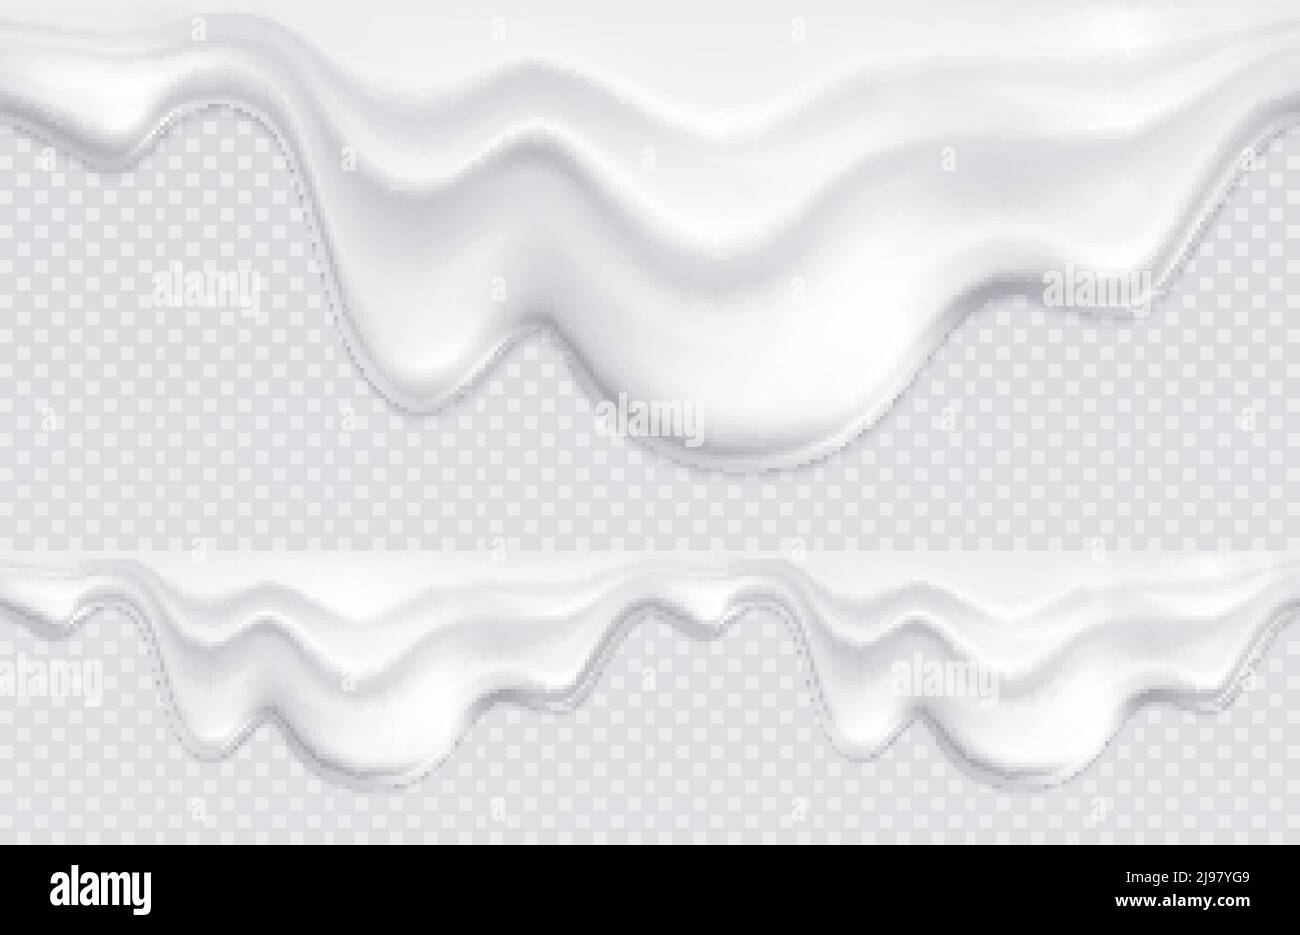 Two borders with pattern composed of white yogurt or ice cream drips on transparent background seamless vector illustration Stock Vector